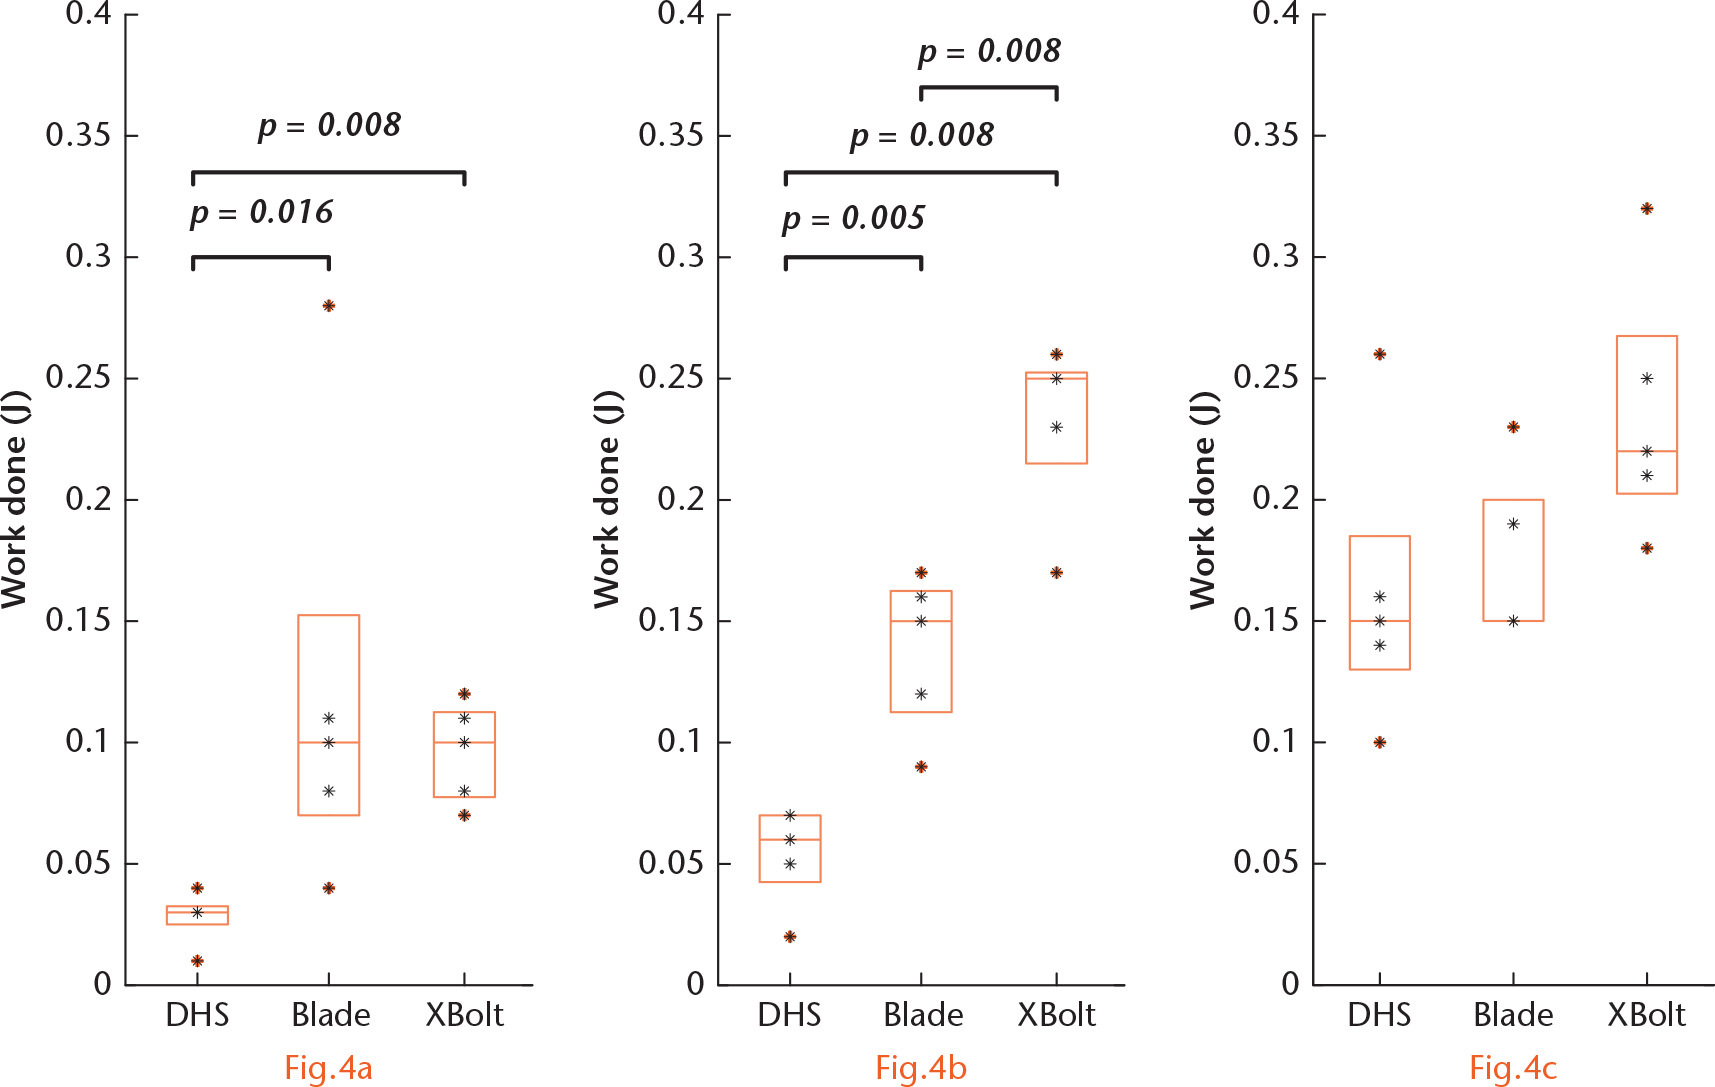  
          Boxplots showing median and interquartile range for all data points of work done (W), for all densities and fixation devices: a) density, 0.08 g/cm3; b) density, 0.16 g/cm3; c) density, 0.24 g/cm3. Statistical significance between groups is stated where p < 0.05 (Mann-Whitney).
        